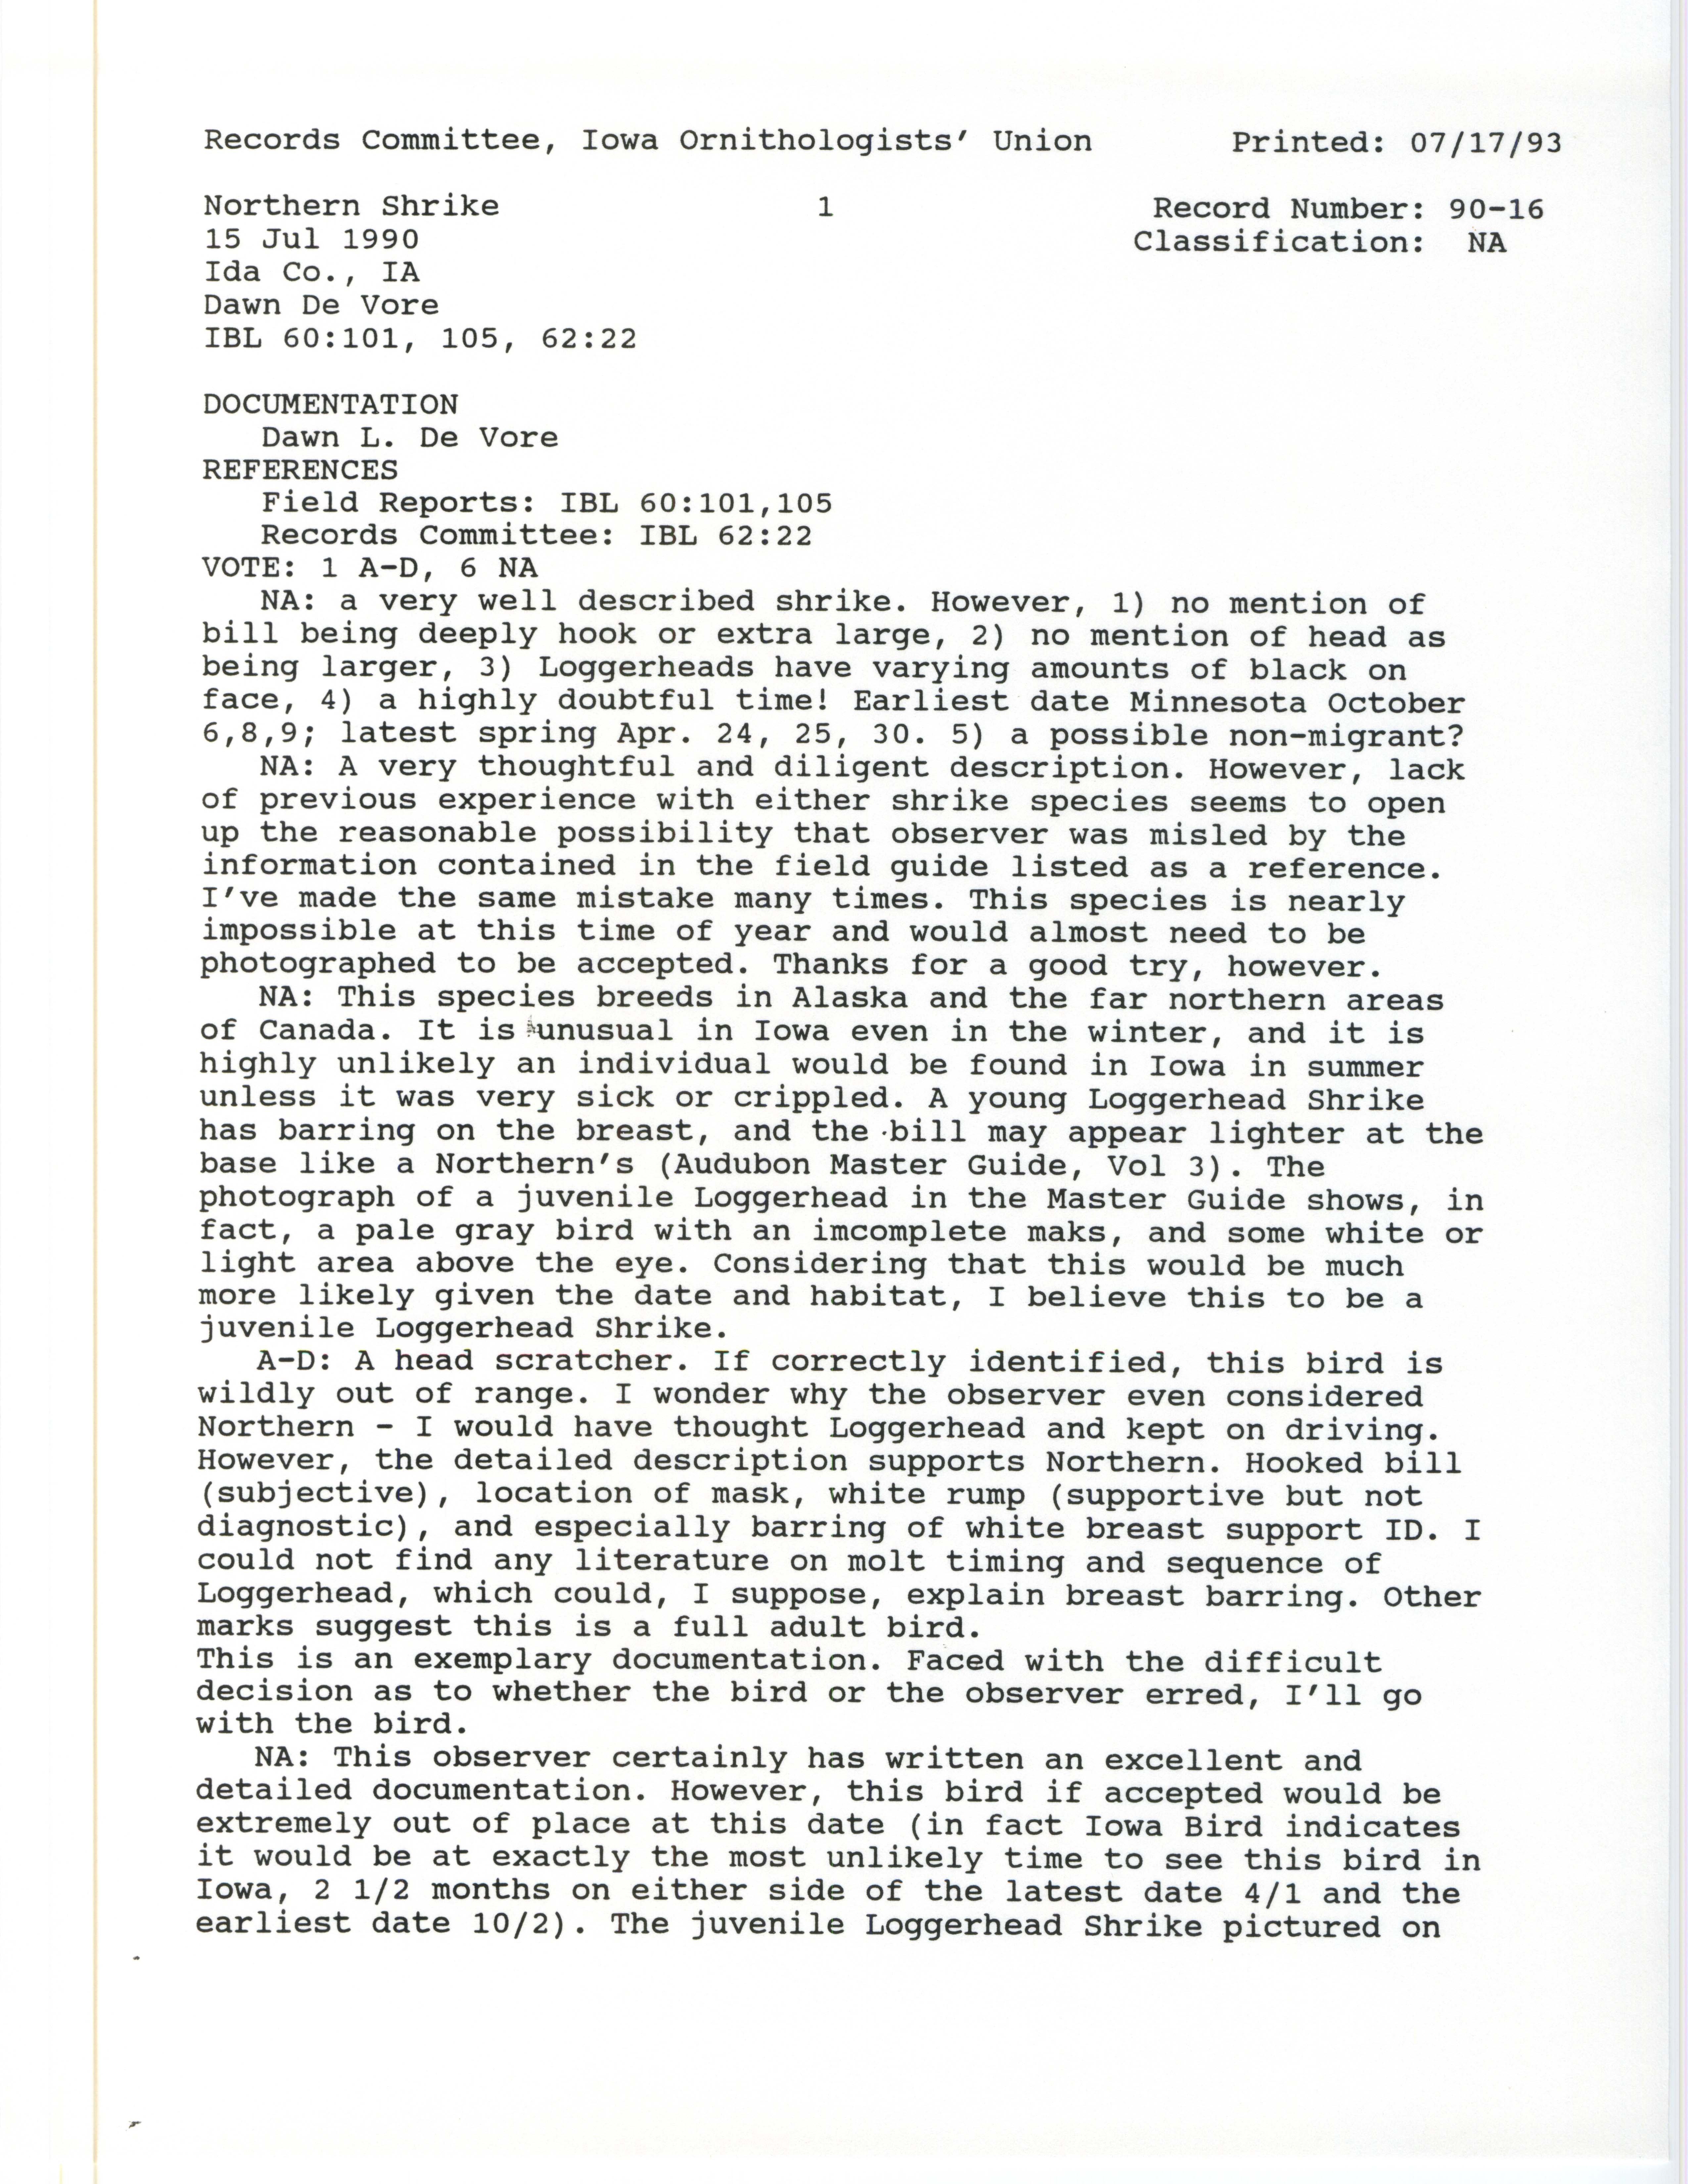 Records Committee review for rare bird sighting for Northern Shrike near Battle Creek, 1990